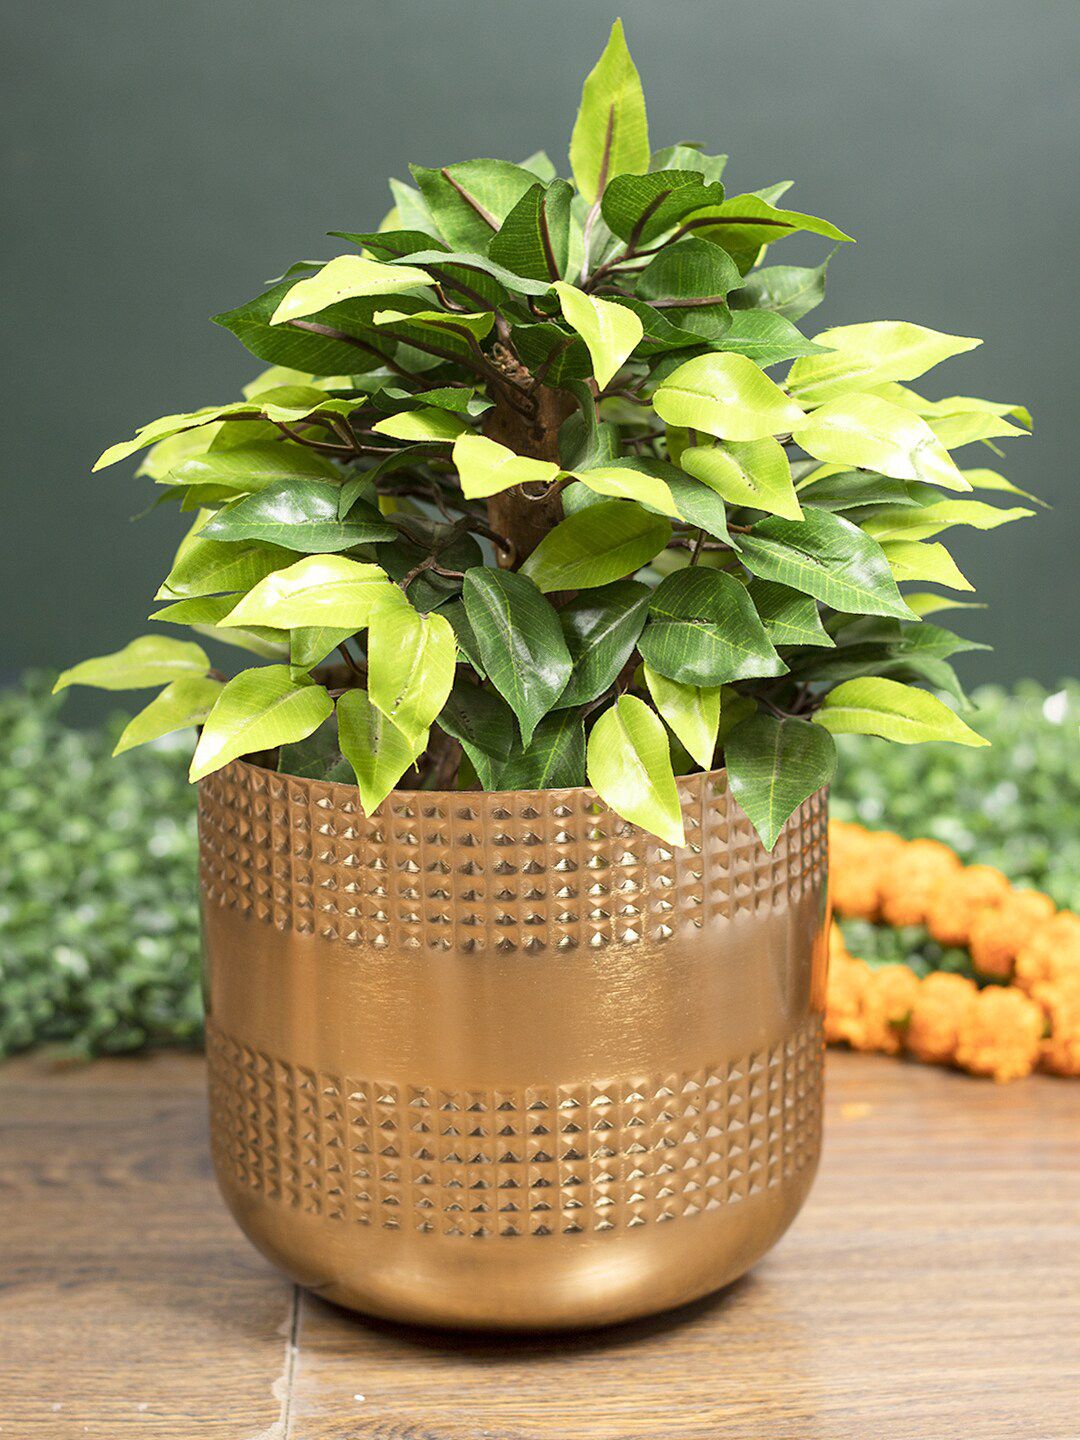 MARKET99 Round Shaped Planter Price in India